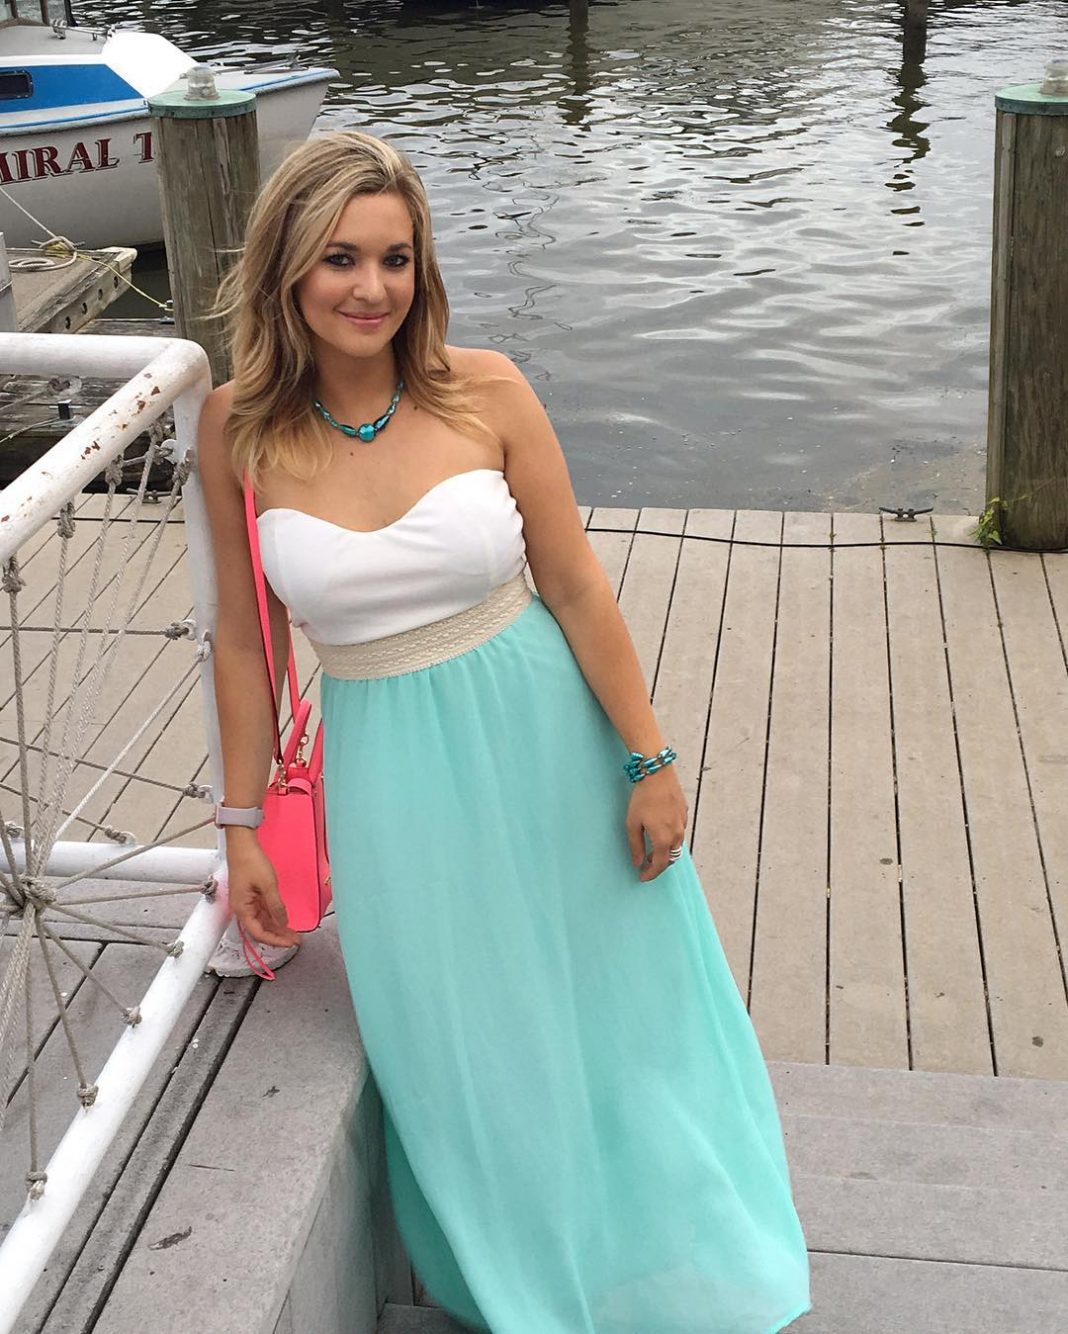 33 Katie Pavlich Nude Pictures Which Makes Her An Enigmatic Glamor Quotient 3